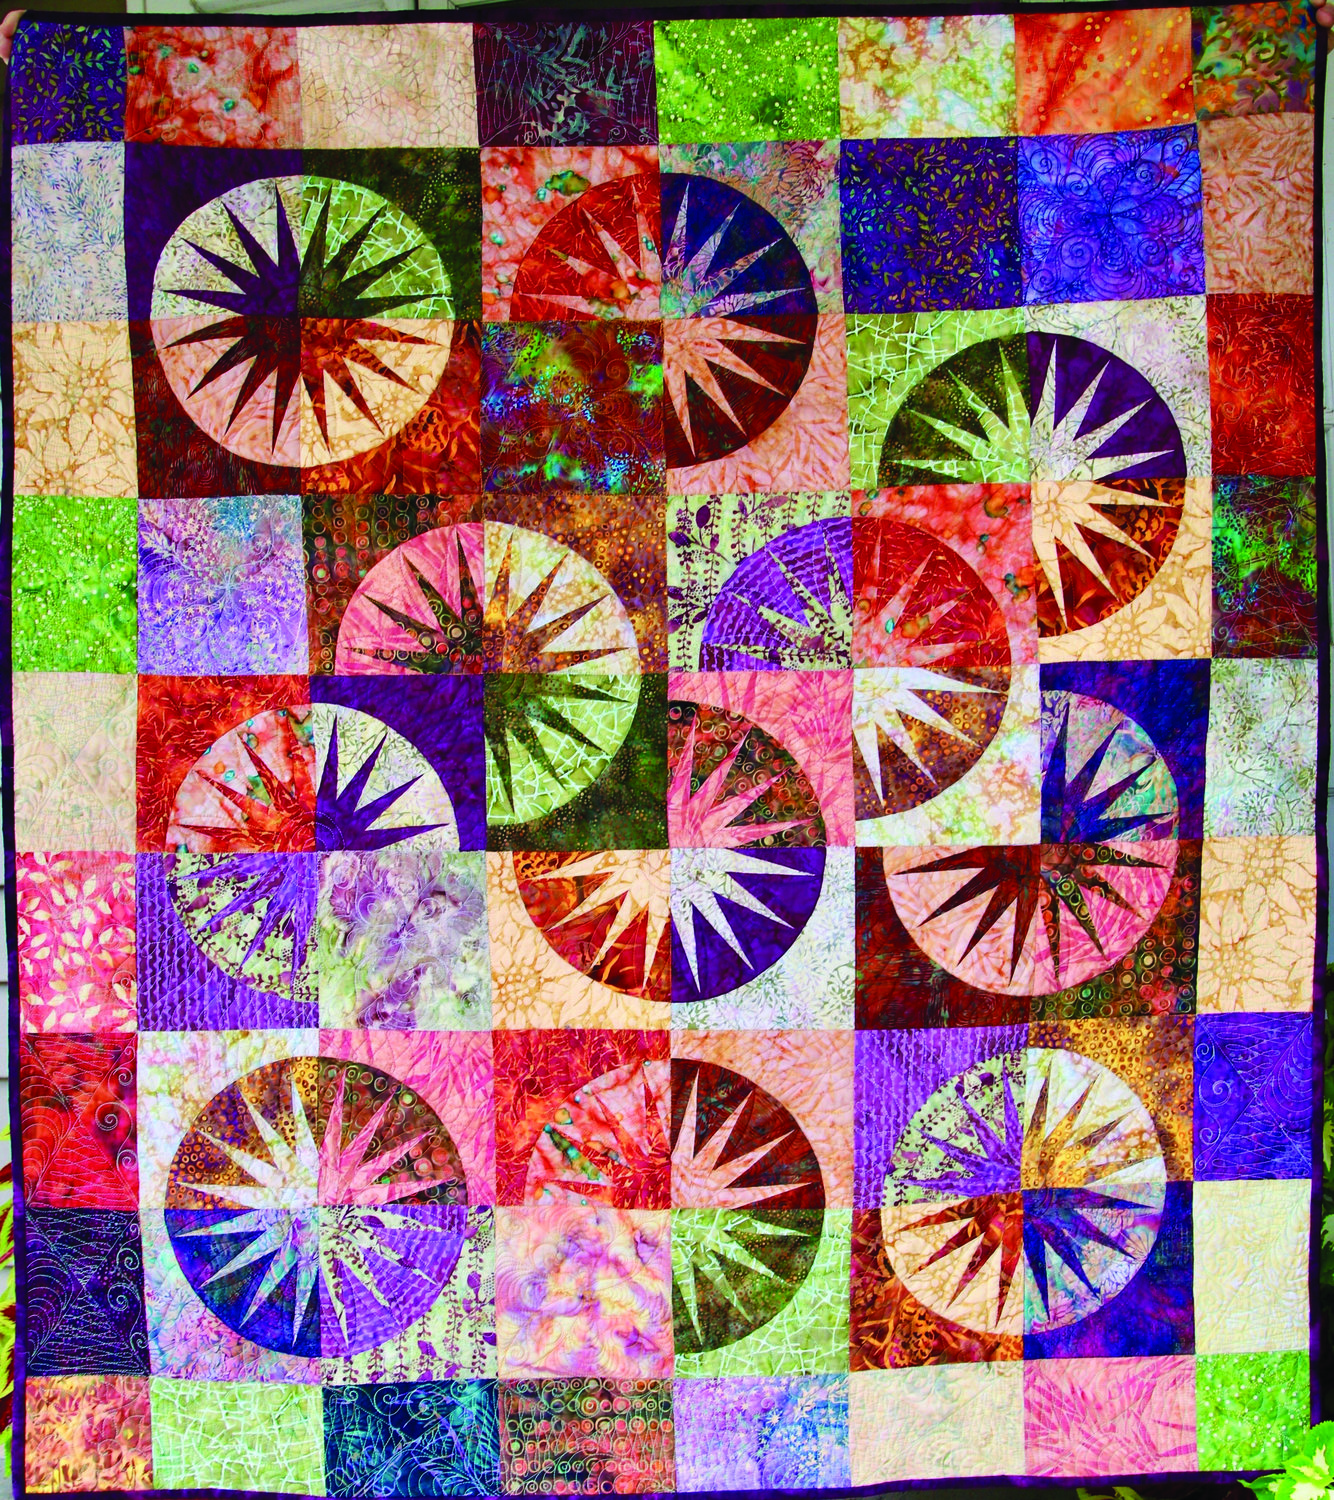 Courthouse Quilters hosts a quilt and crafts show Nov. 6, in Flemington, N.J.